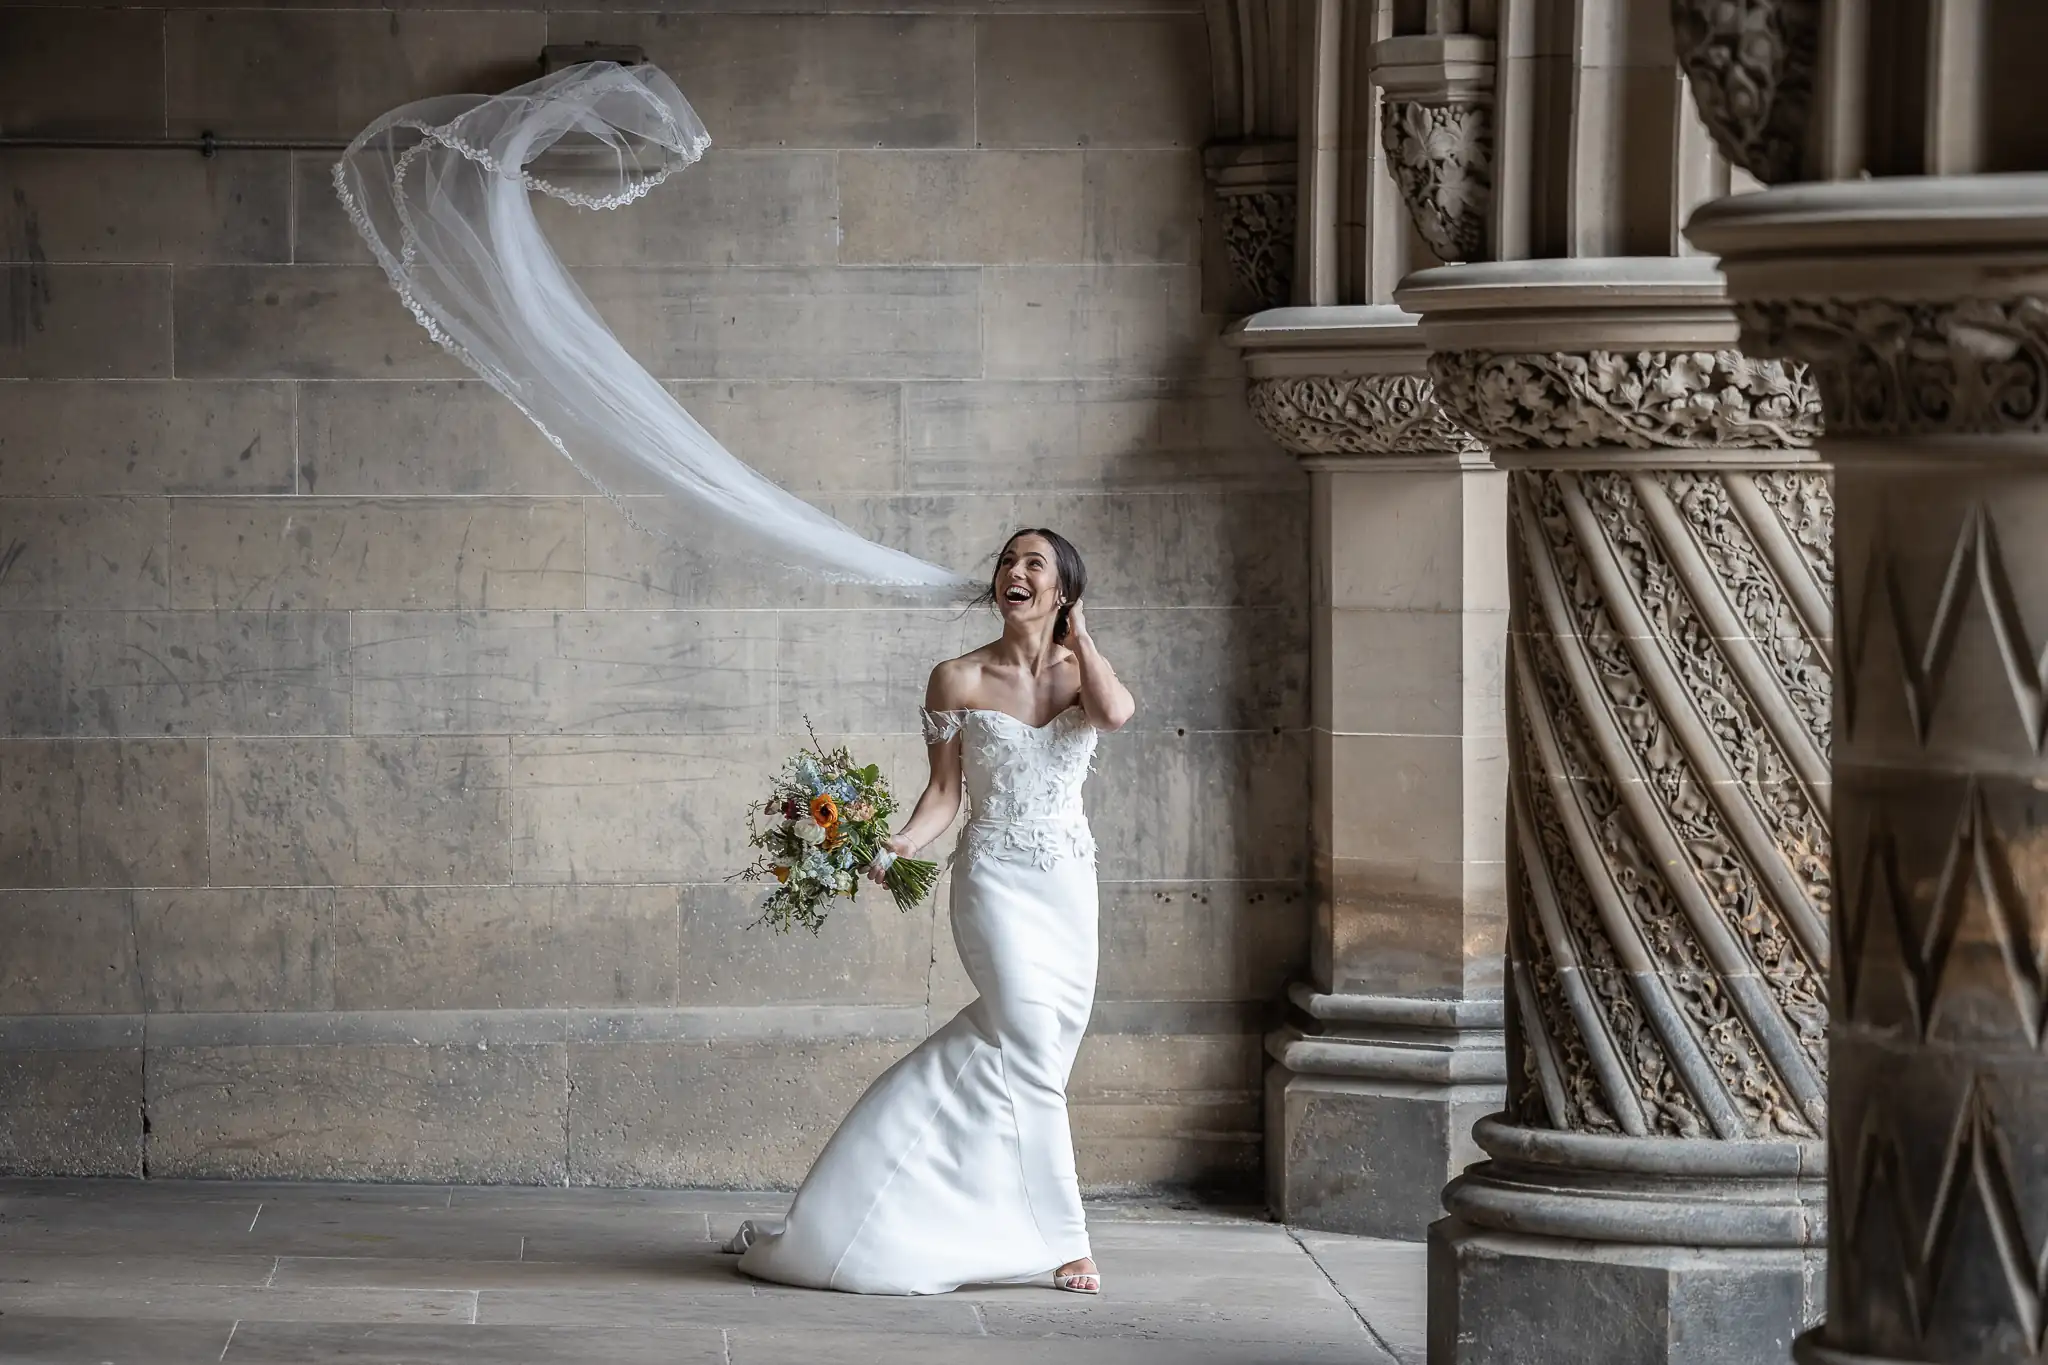 A bride in a fitted white gown joyfully throws her veil into the air in a grand stone corridor, holding a bouquet of flowers.